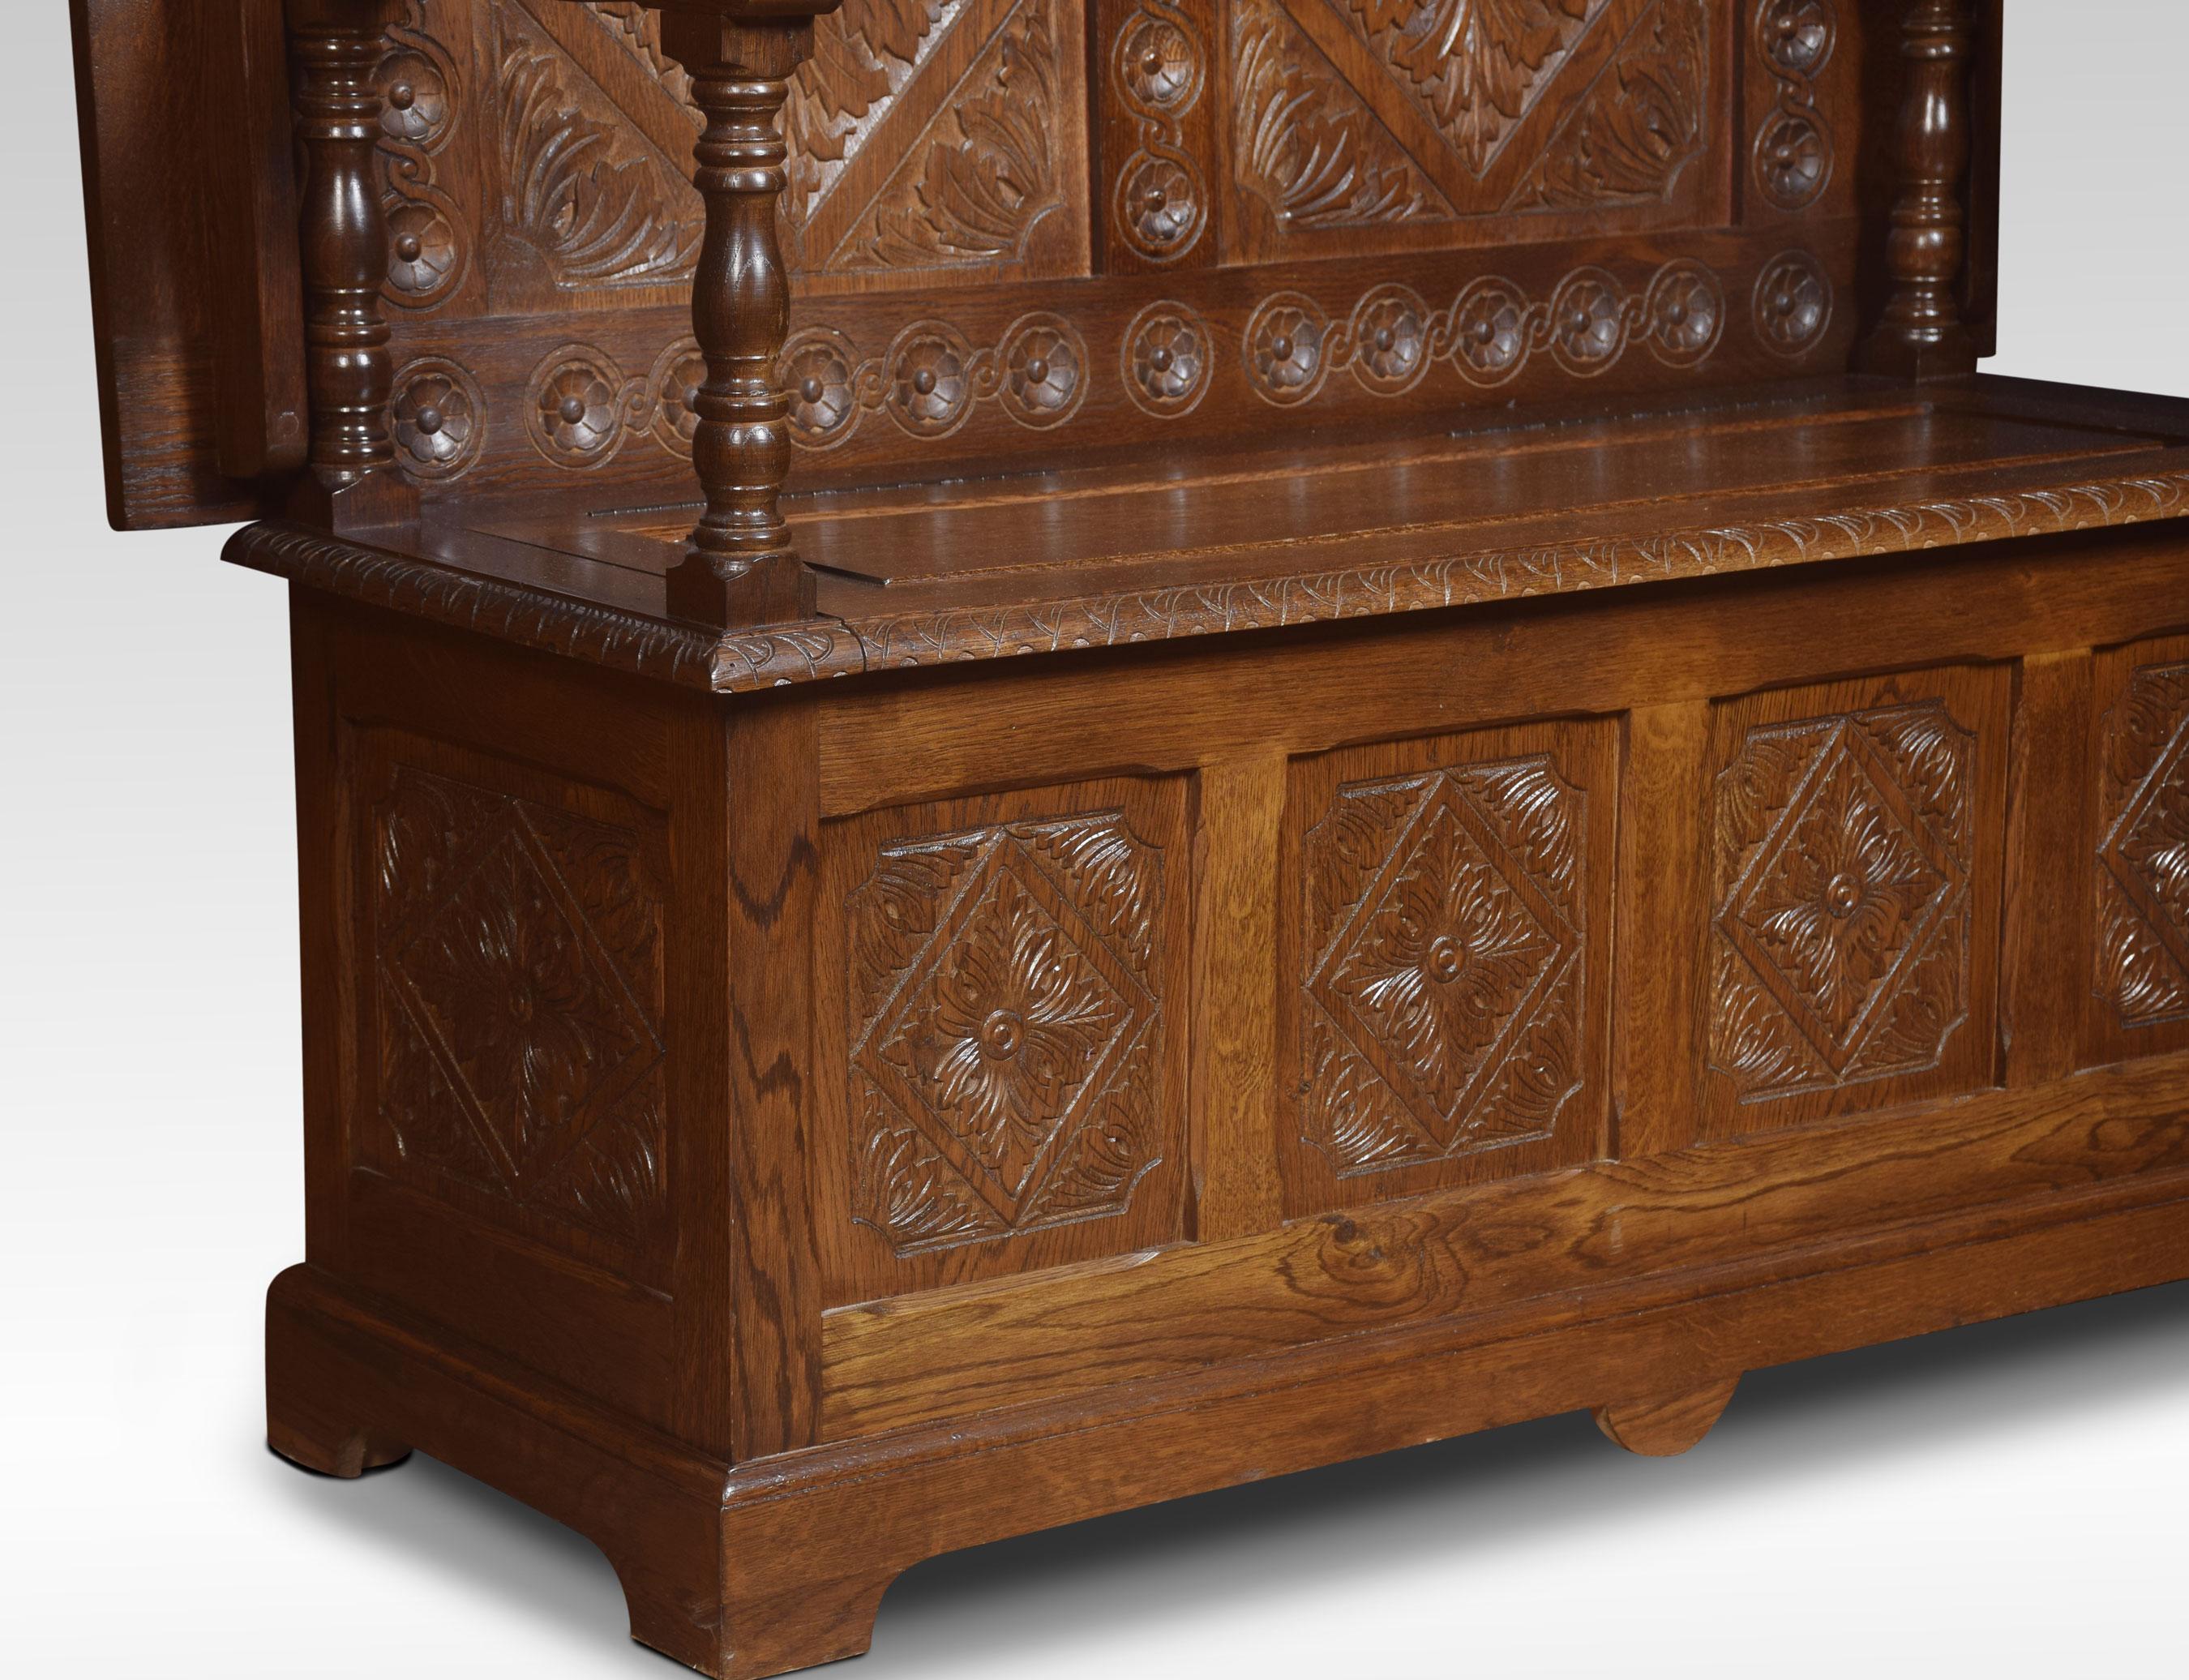 British Carved Oak Monk’s Bench or Hall Bench